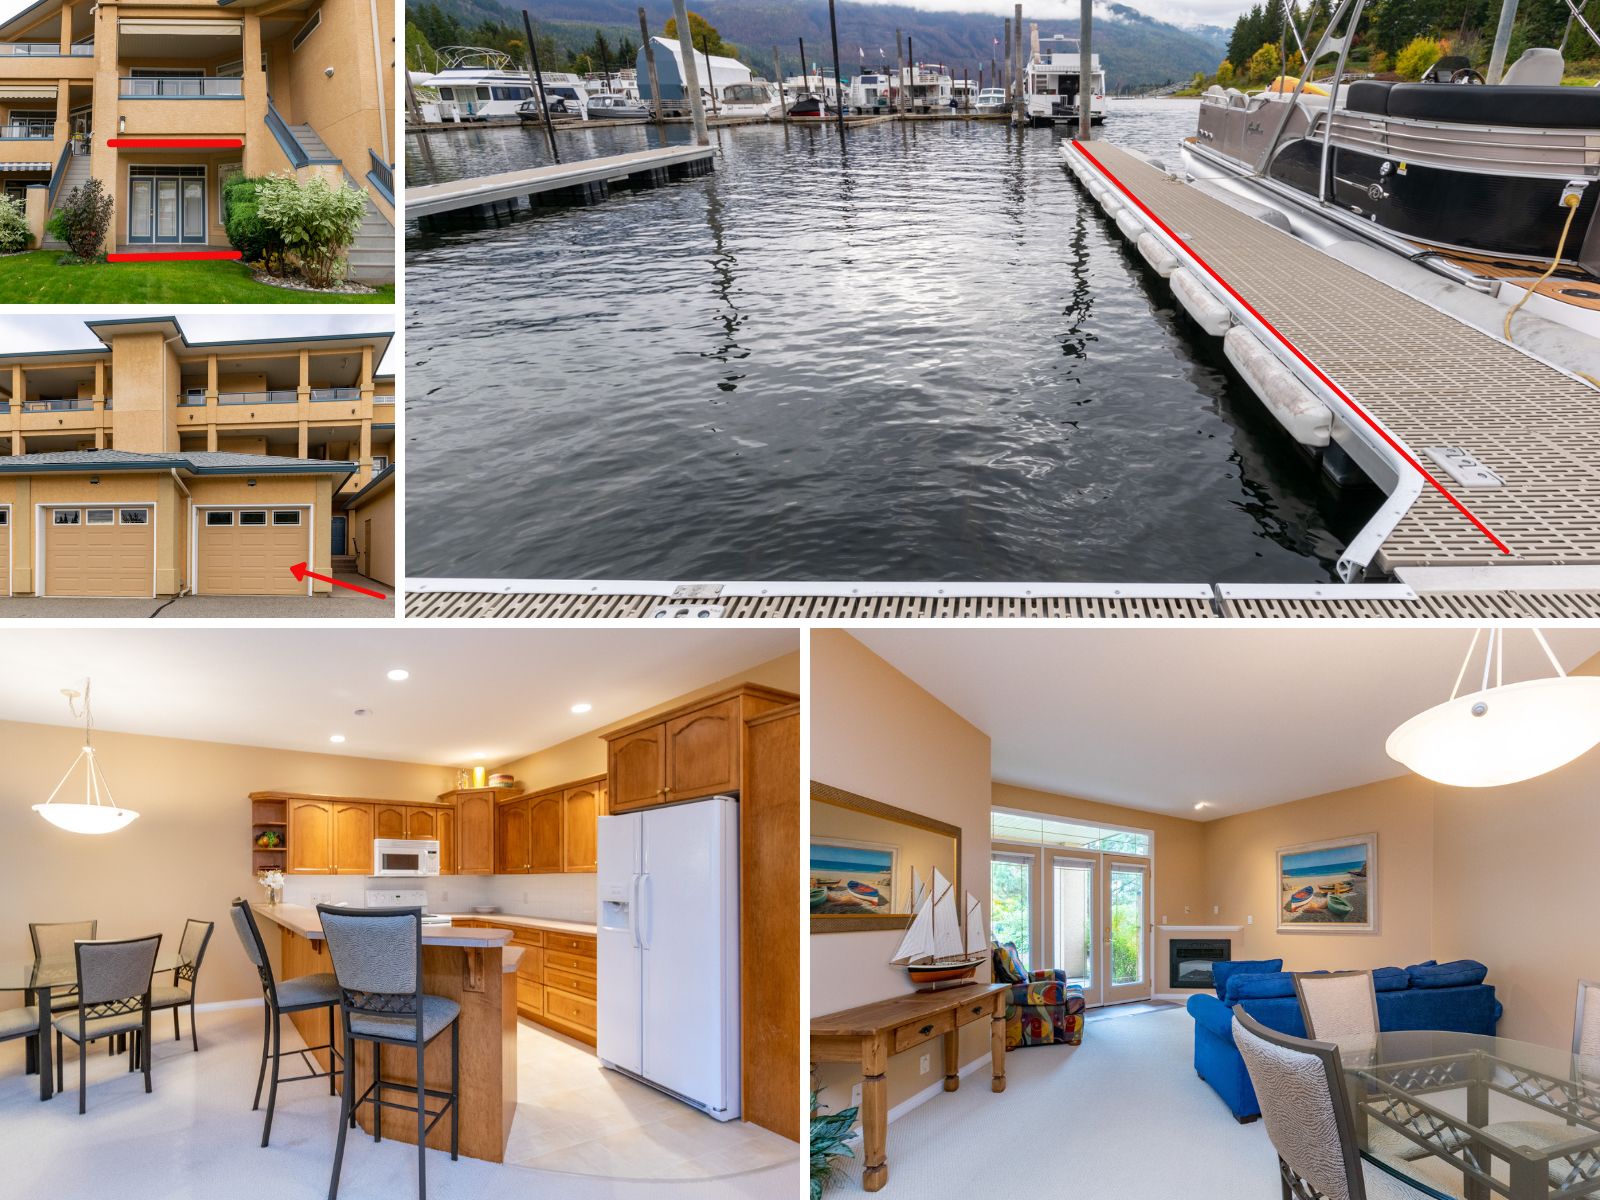 Main Photo: 41 714 Riverside Avenue in Sicamous: Multi-family for sale : MLS®# 10241714